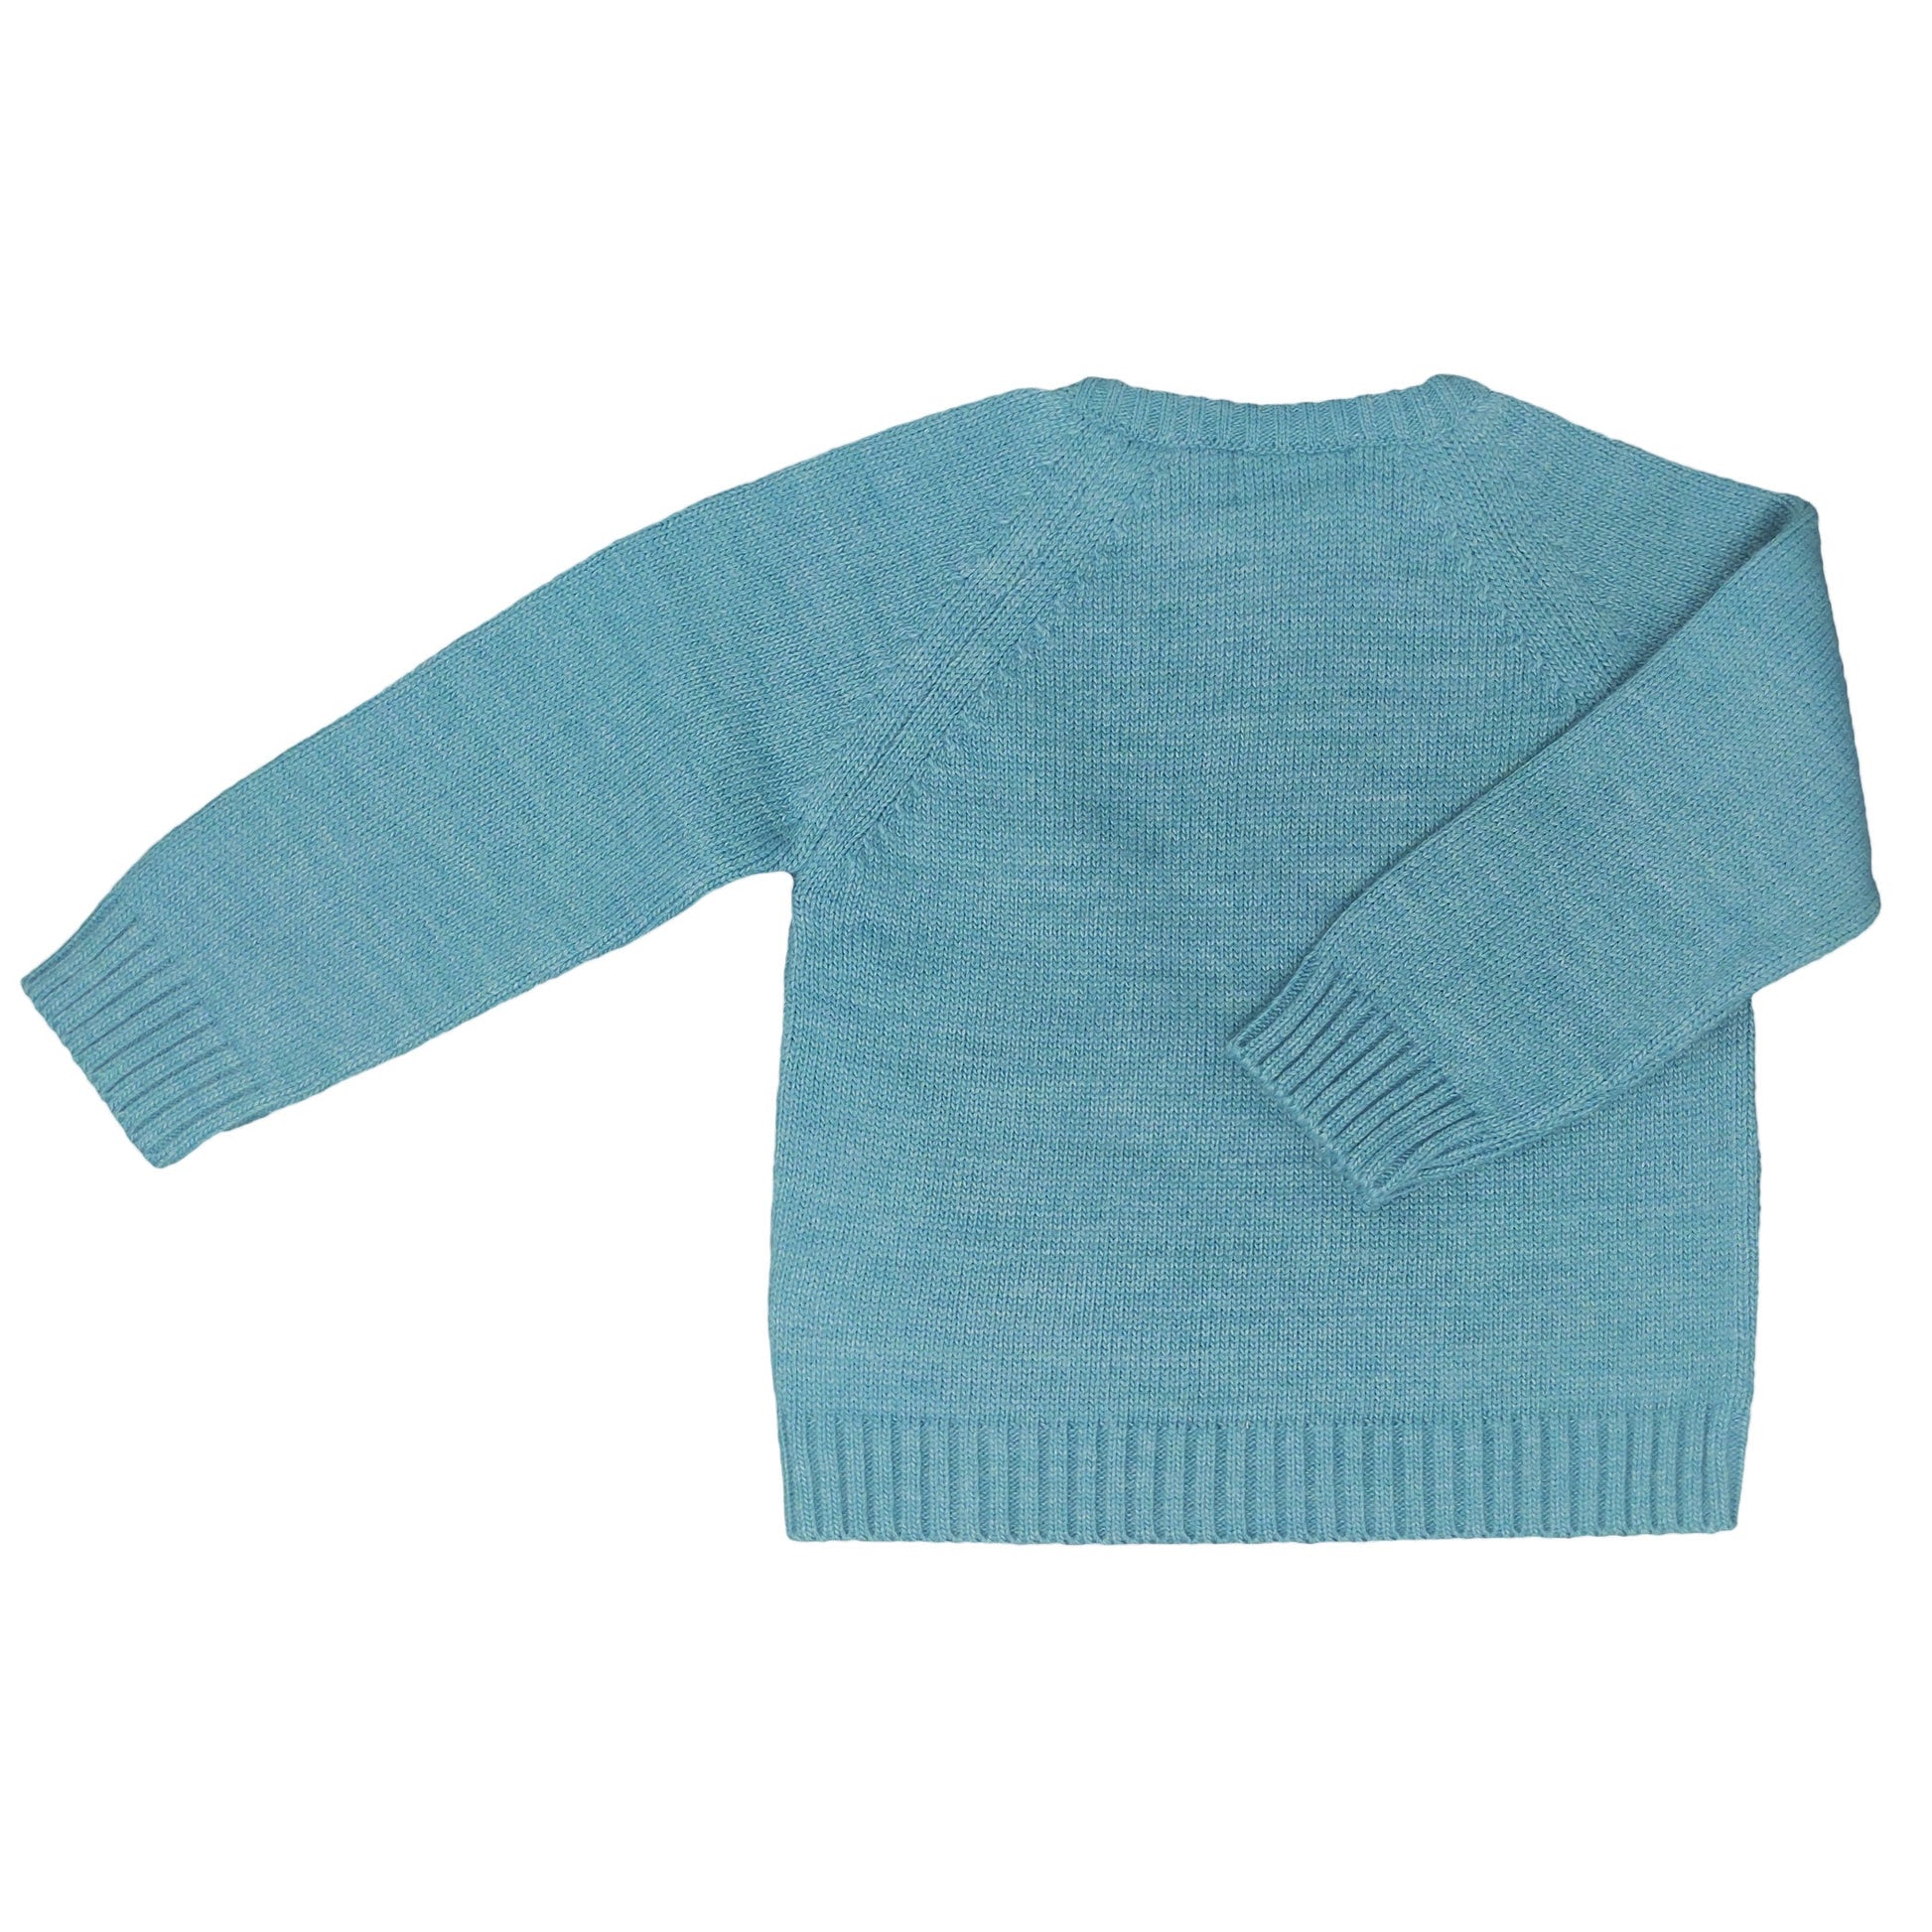 Turquoise knitted pullover |  | Iberica - Pretty things from Portugal